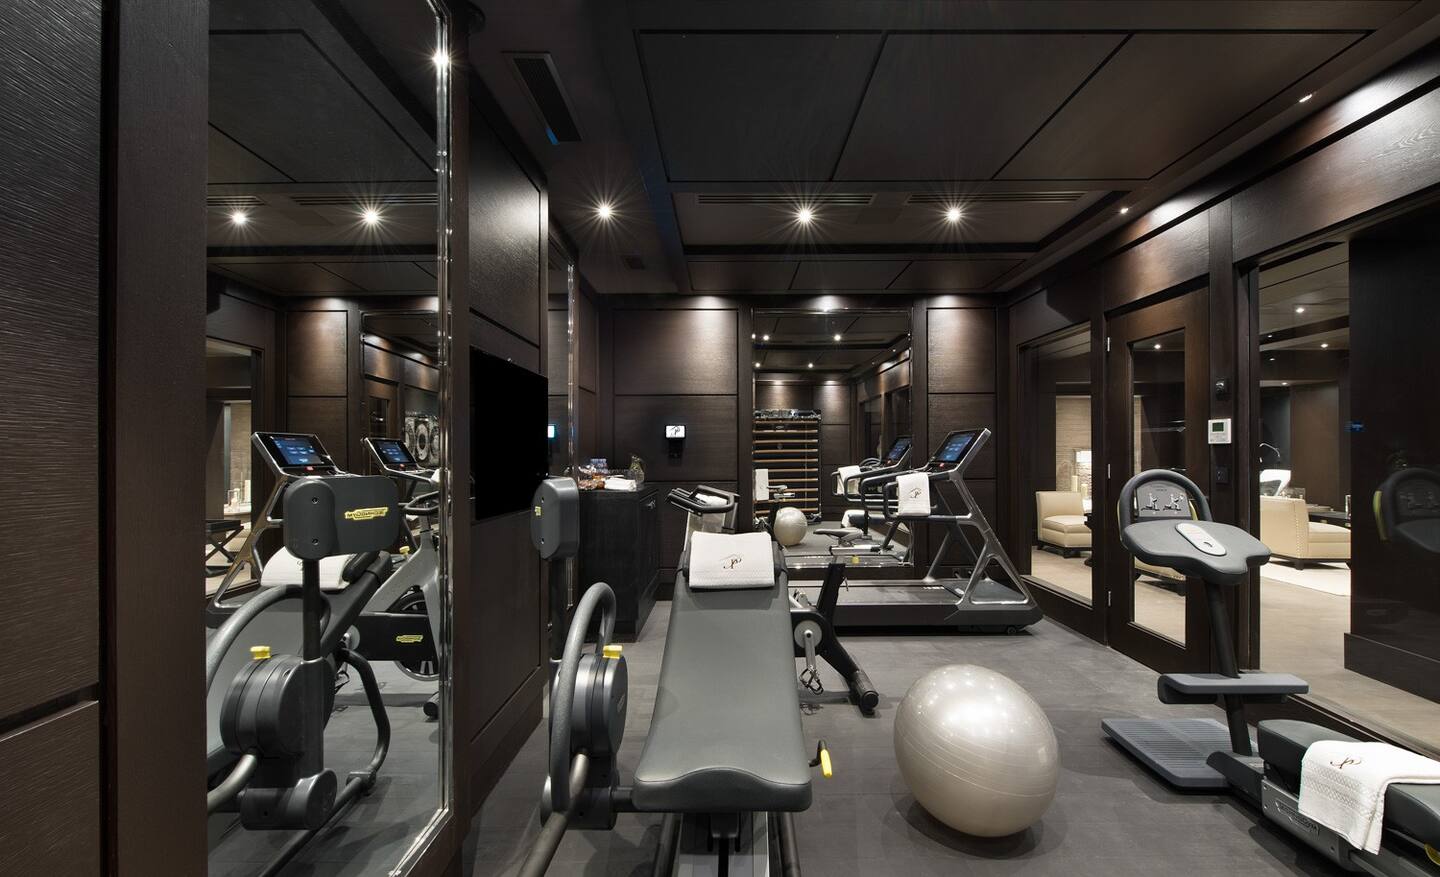 State-of-the-art gym, your personal space to stay fit and healthy.